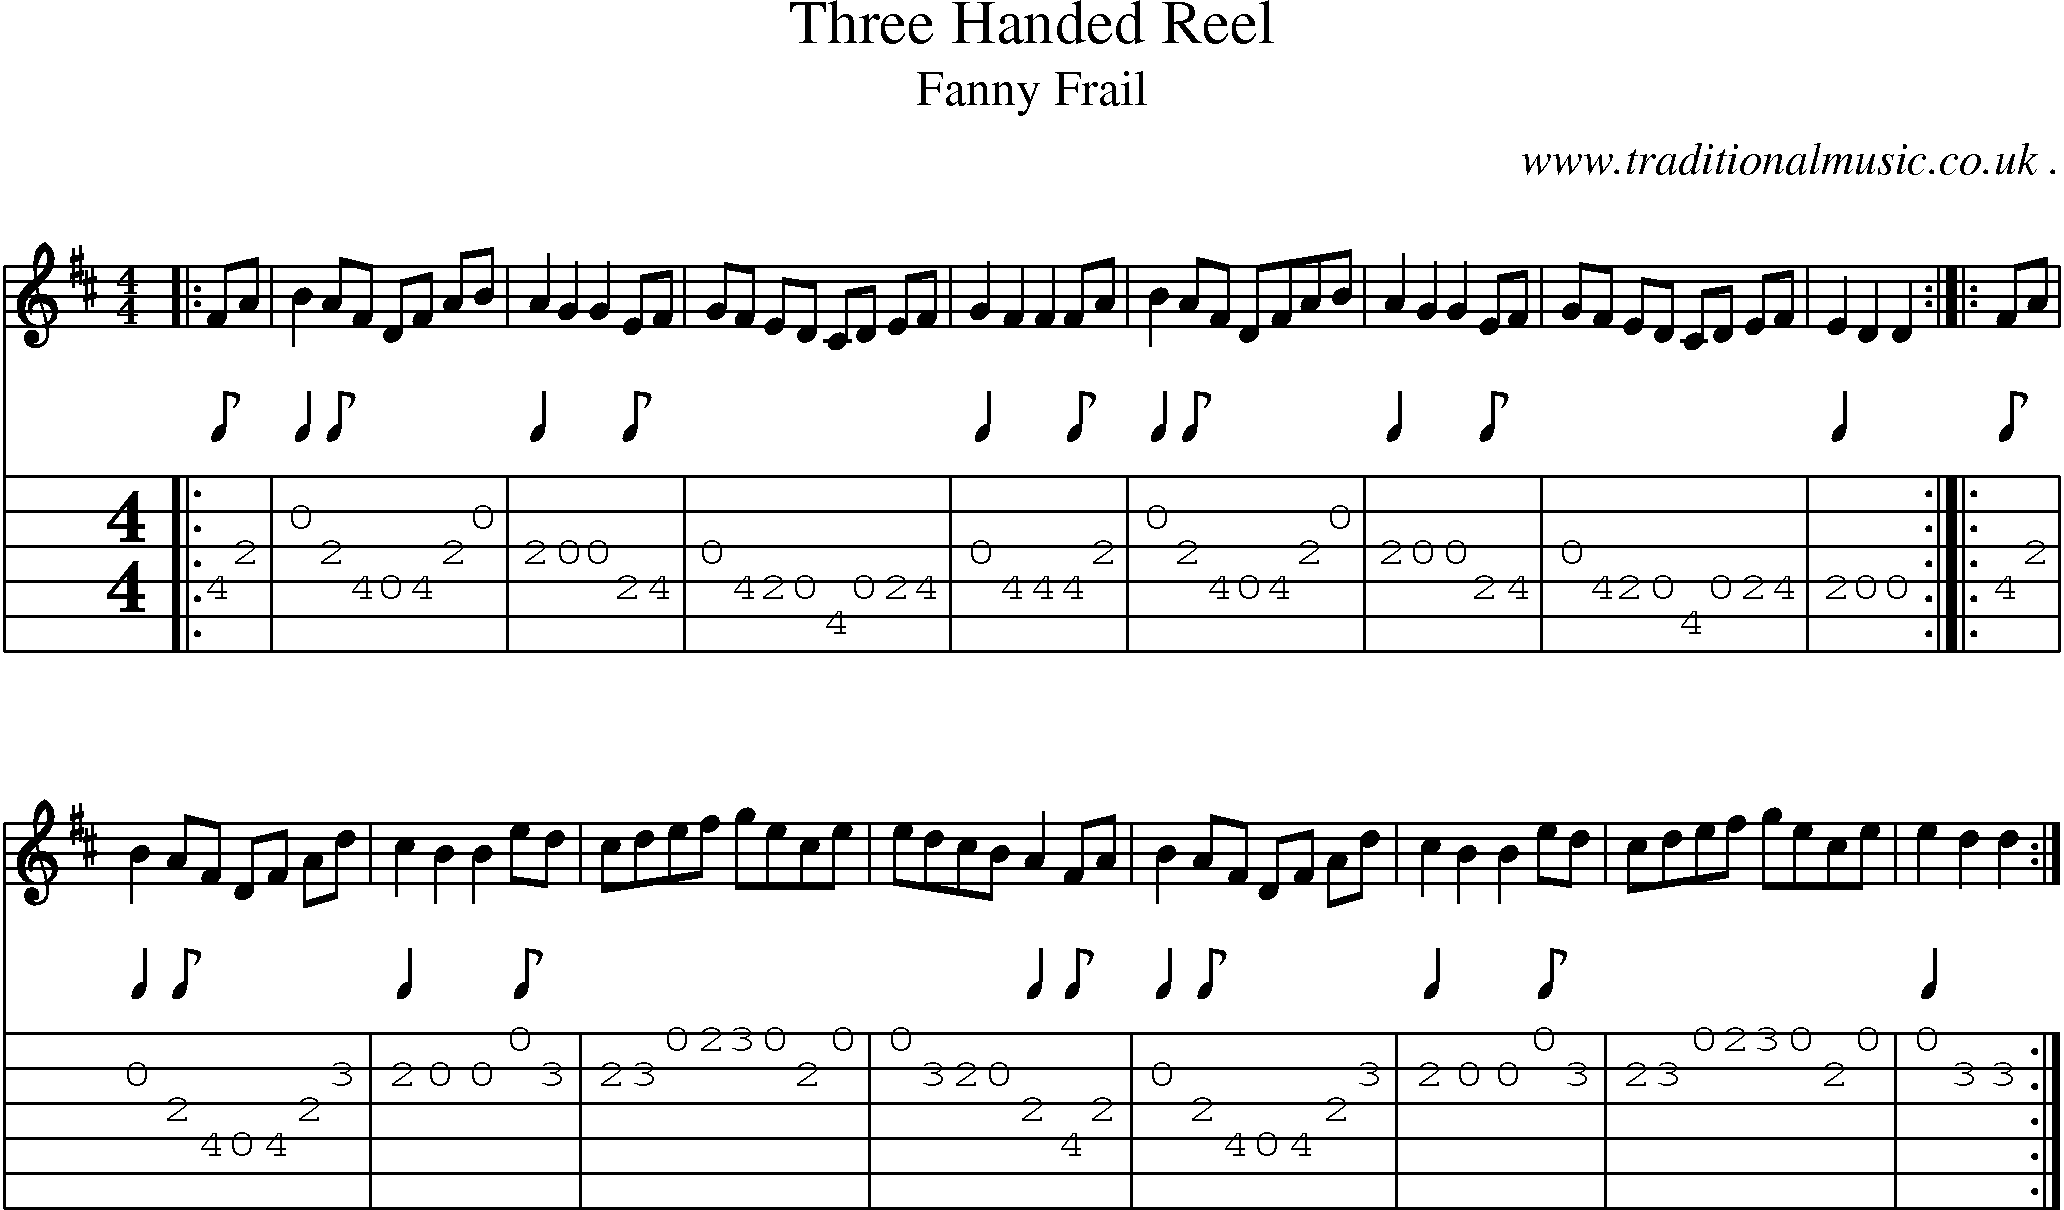 Sheet-Music and Guitar Tabs for Three Handed Reel